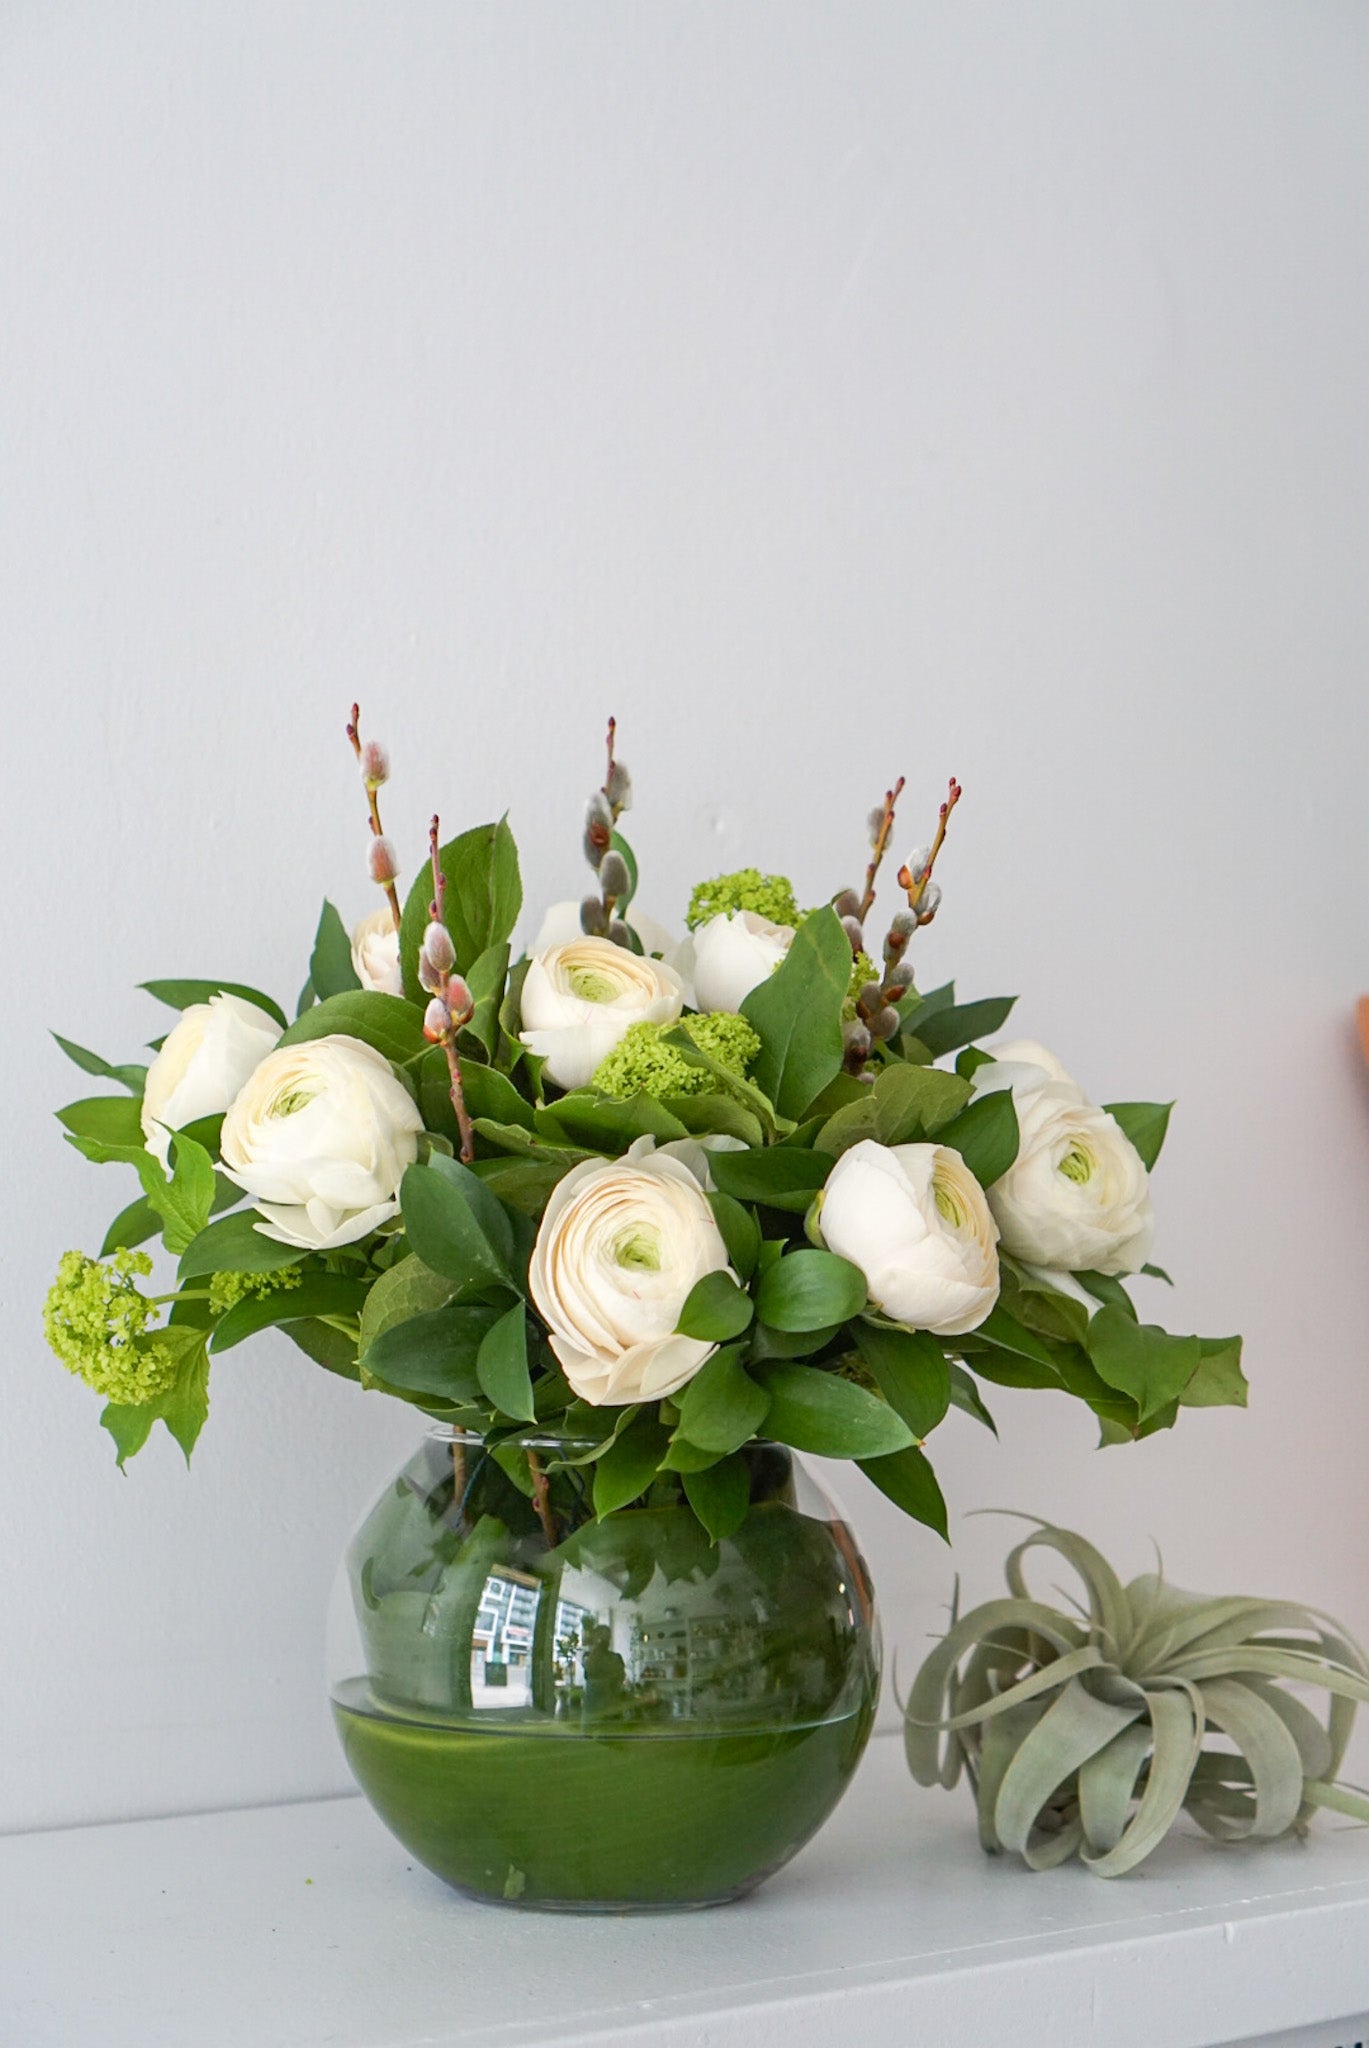 The Flower Nook a Toronto Florist using premium flowers that are professionally arranged, hand-delivered throughout Toronto and GTA